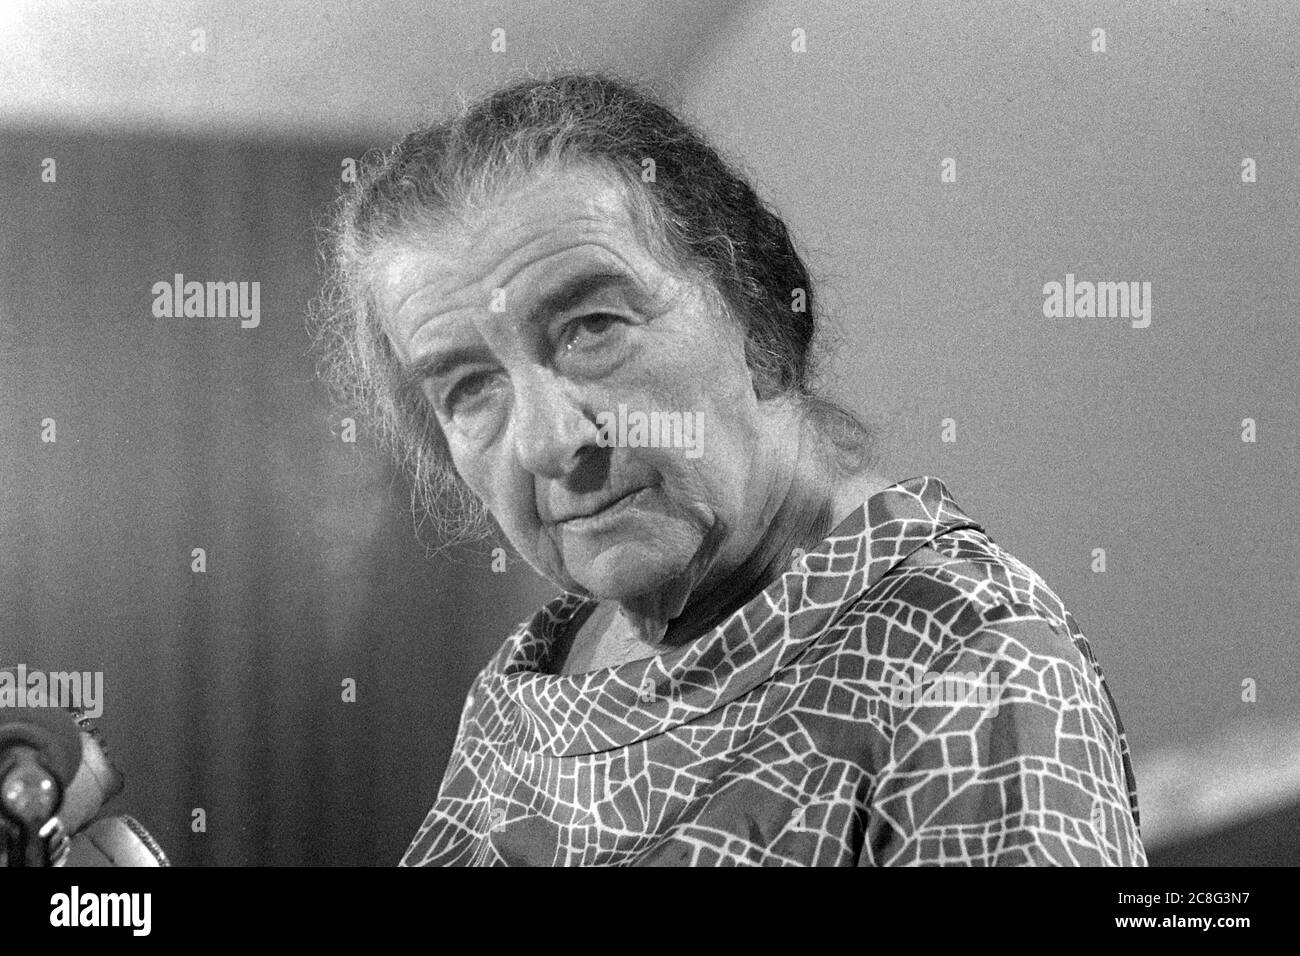 Golda MEIR, Israeli Prime Minister, politician, at a press conference, portrait, portrait, portrait, cropped single image, single motif, stands at a lectern with microphones, during the Yom Kippur War, the Yom Kippur War between Israel and the Arab States of Egypt, Jordan and Syria lasted from October 6 to October 25, 1973, | usage worldwide Stock Photo